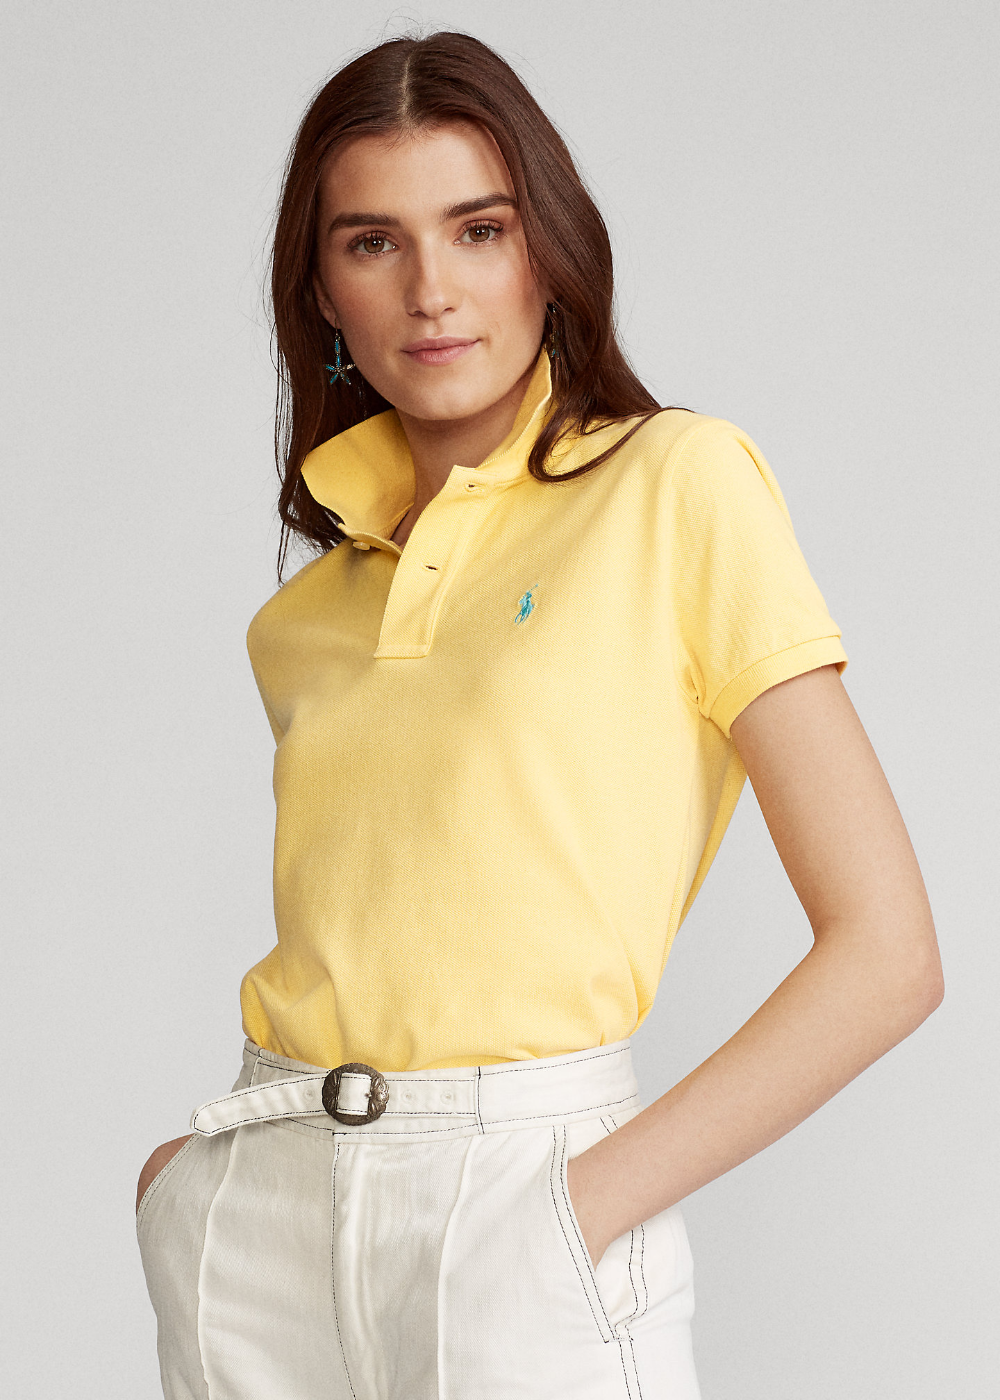 How to Wear Embroidered Polo Shirt: Best 13 Smart Casual Outfits for Women